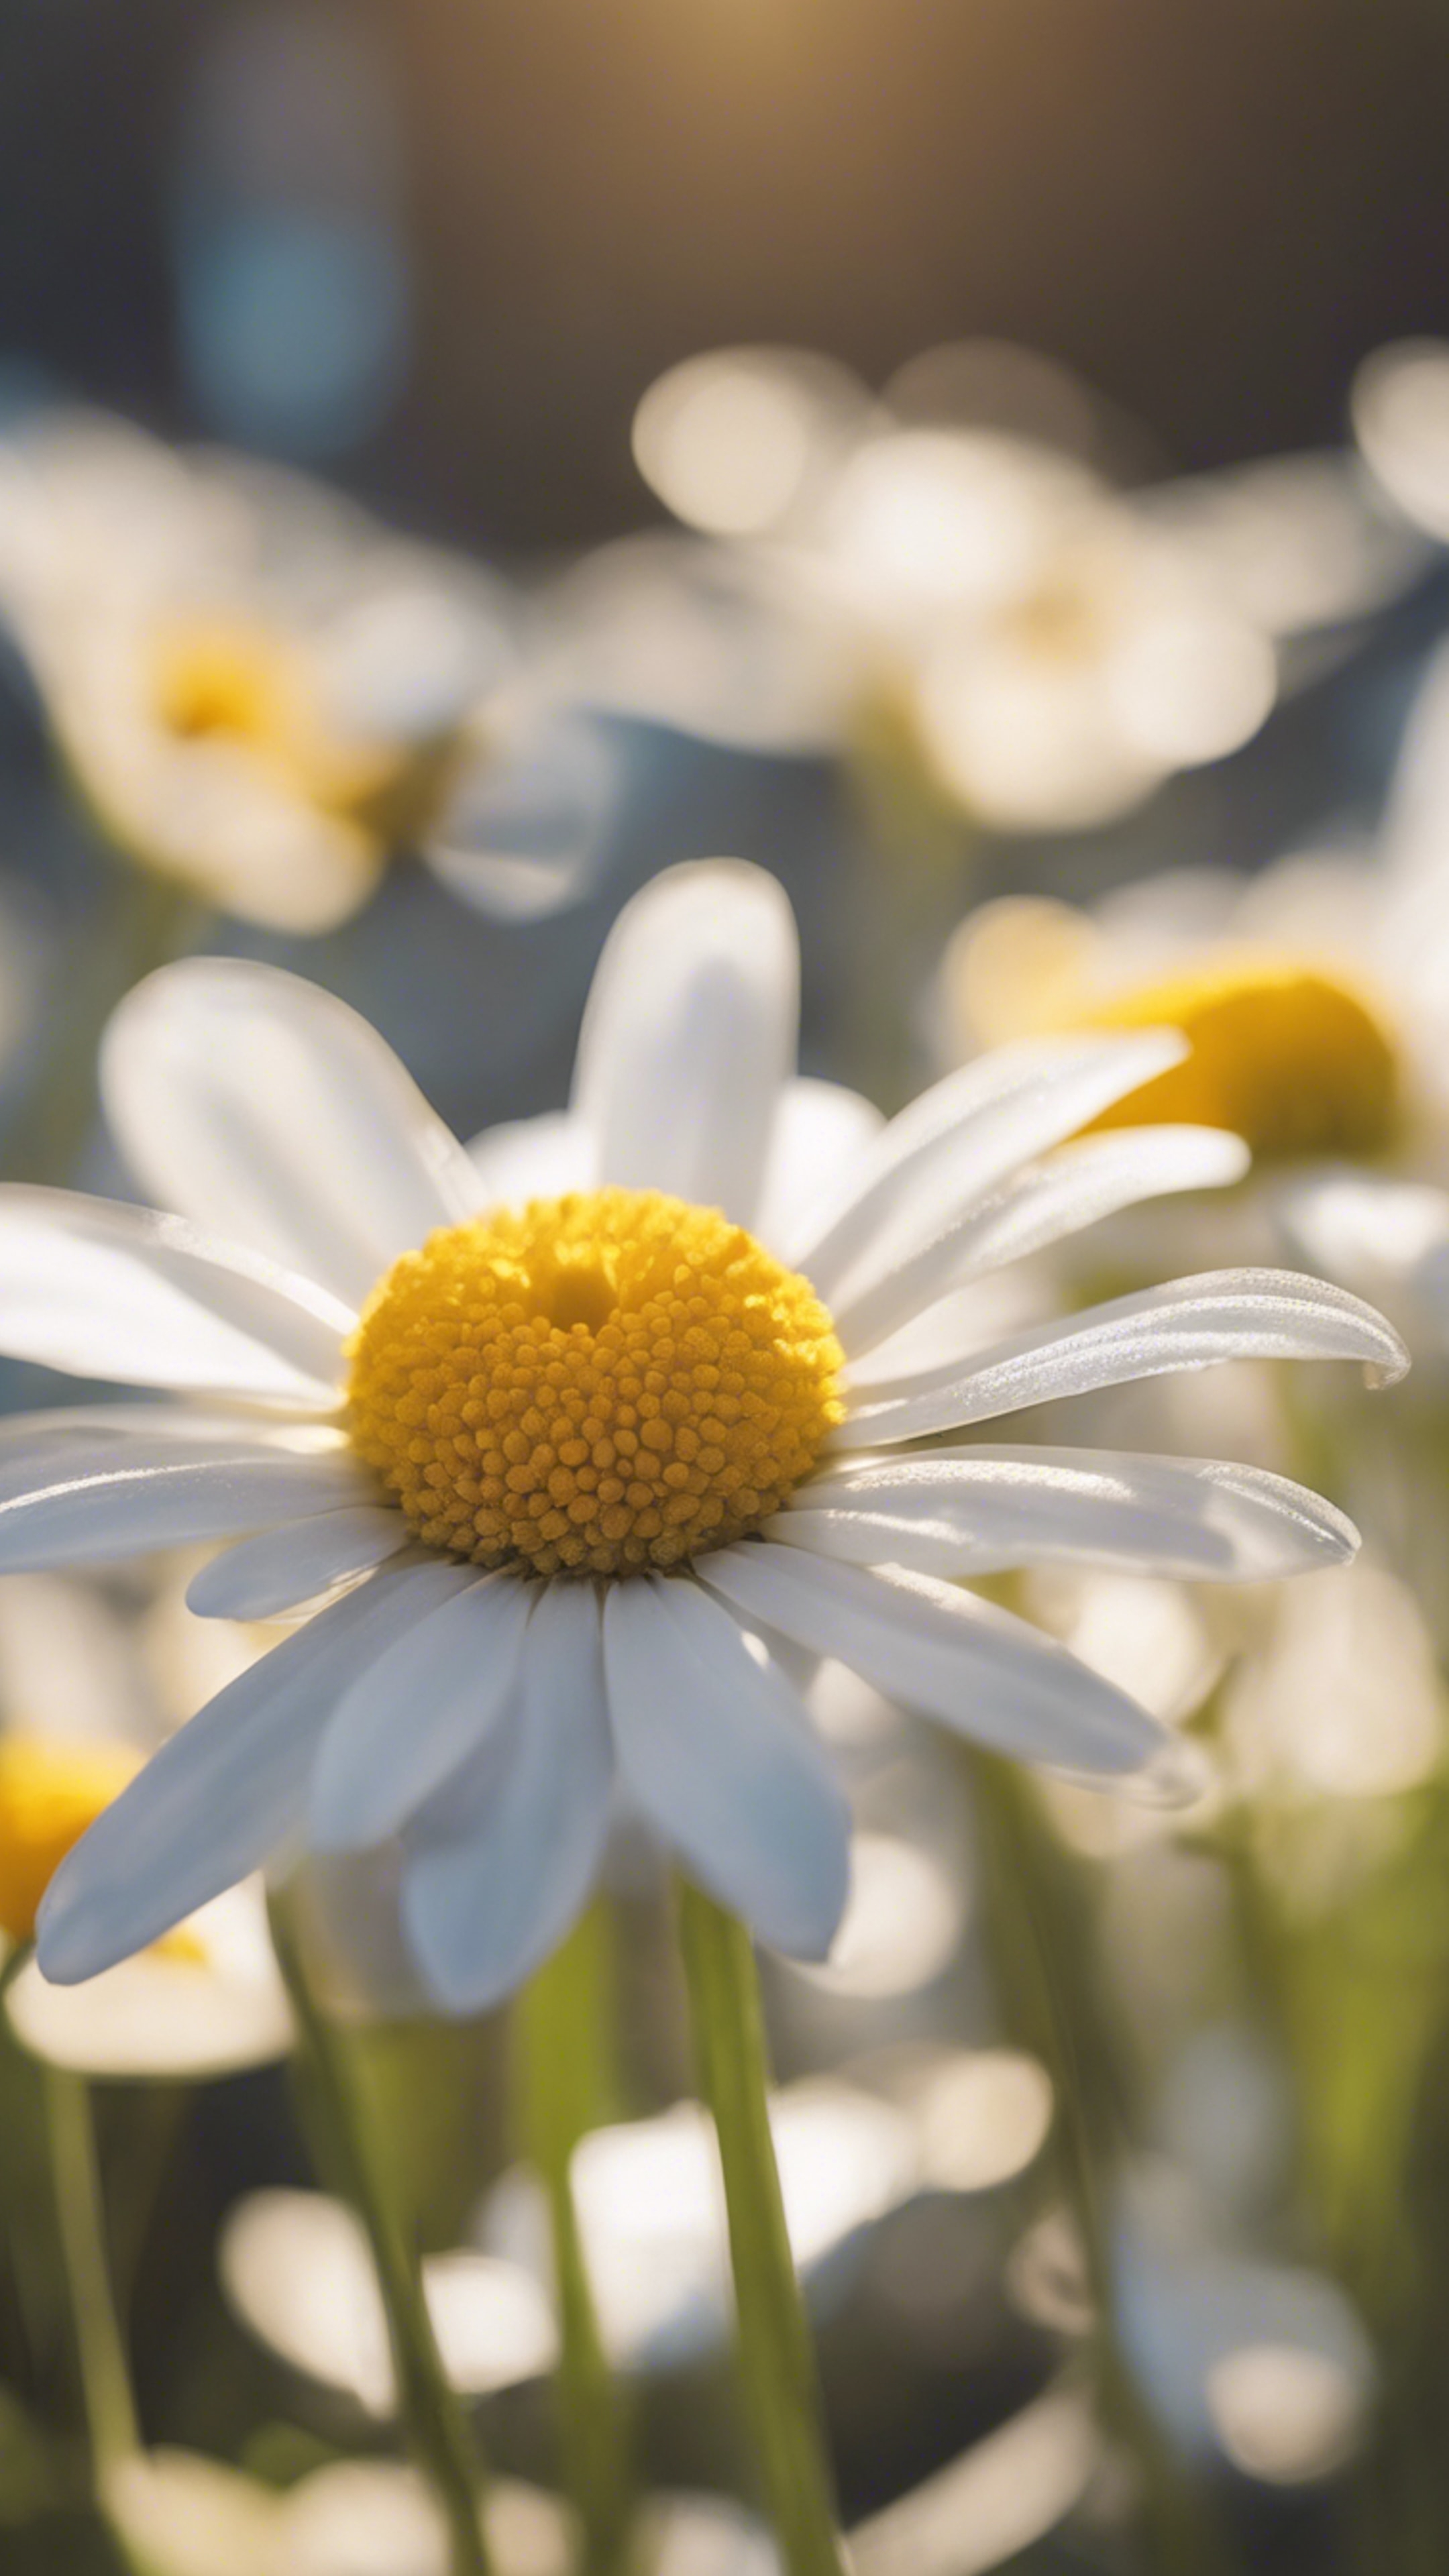 A single daisy with bright yellow center and white petals in the sunlit morning.壁紙[38fa296f7e504f5c9ea0]